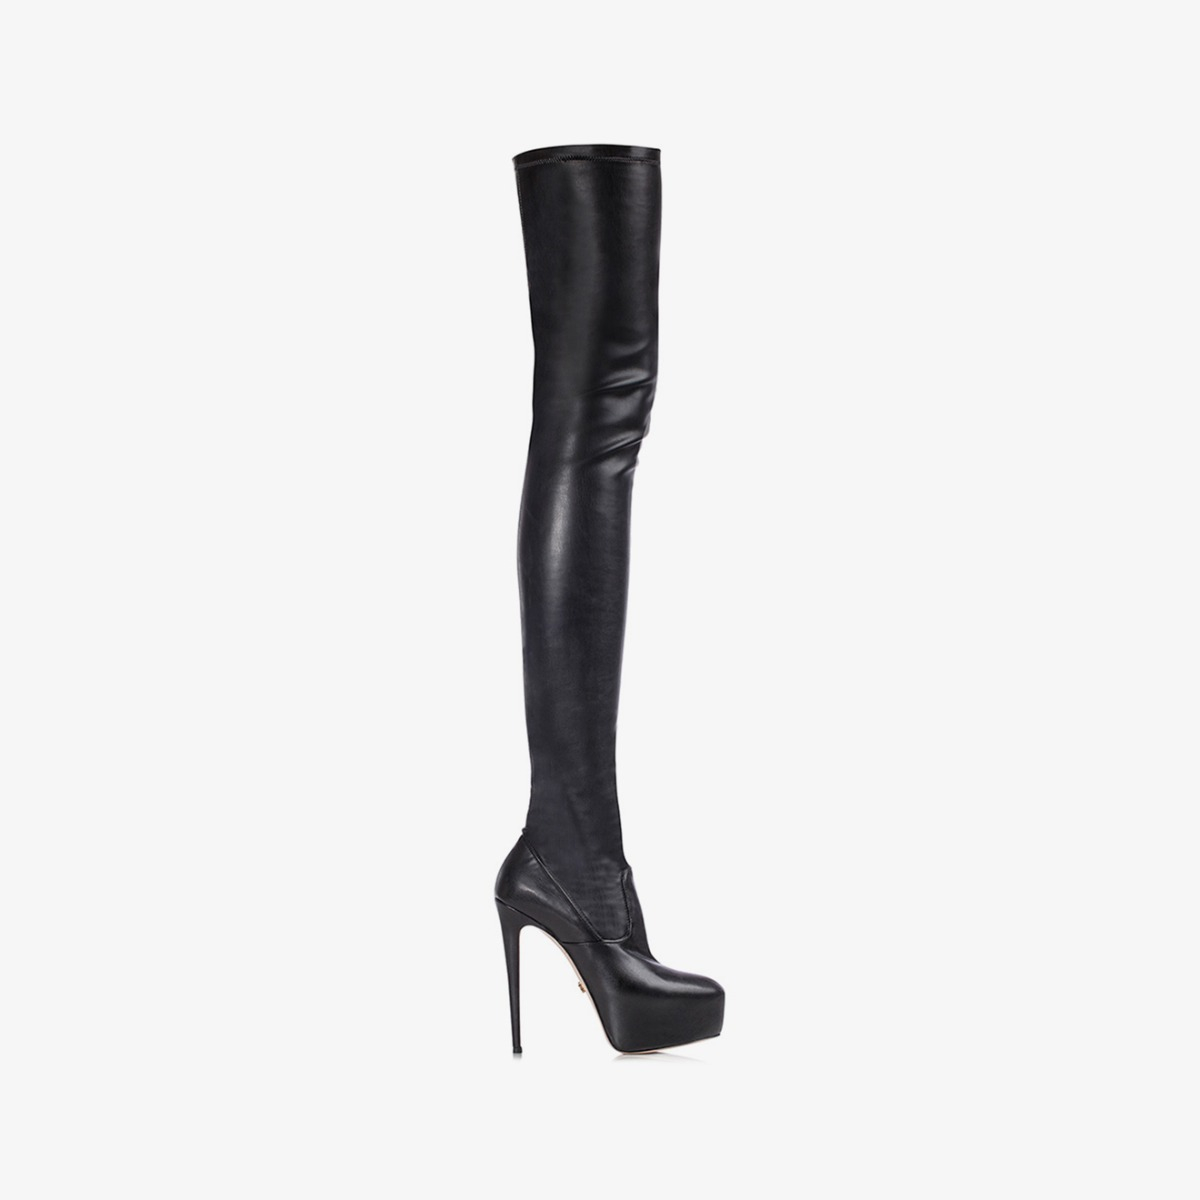 MIRANDA THIGH-HIGH BOOT 140 mm - Le Silla official outlet